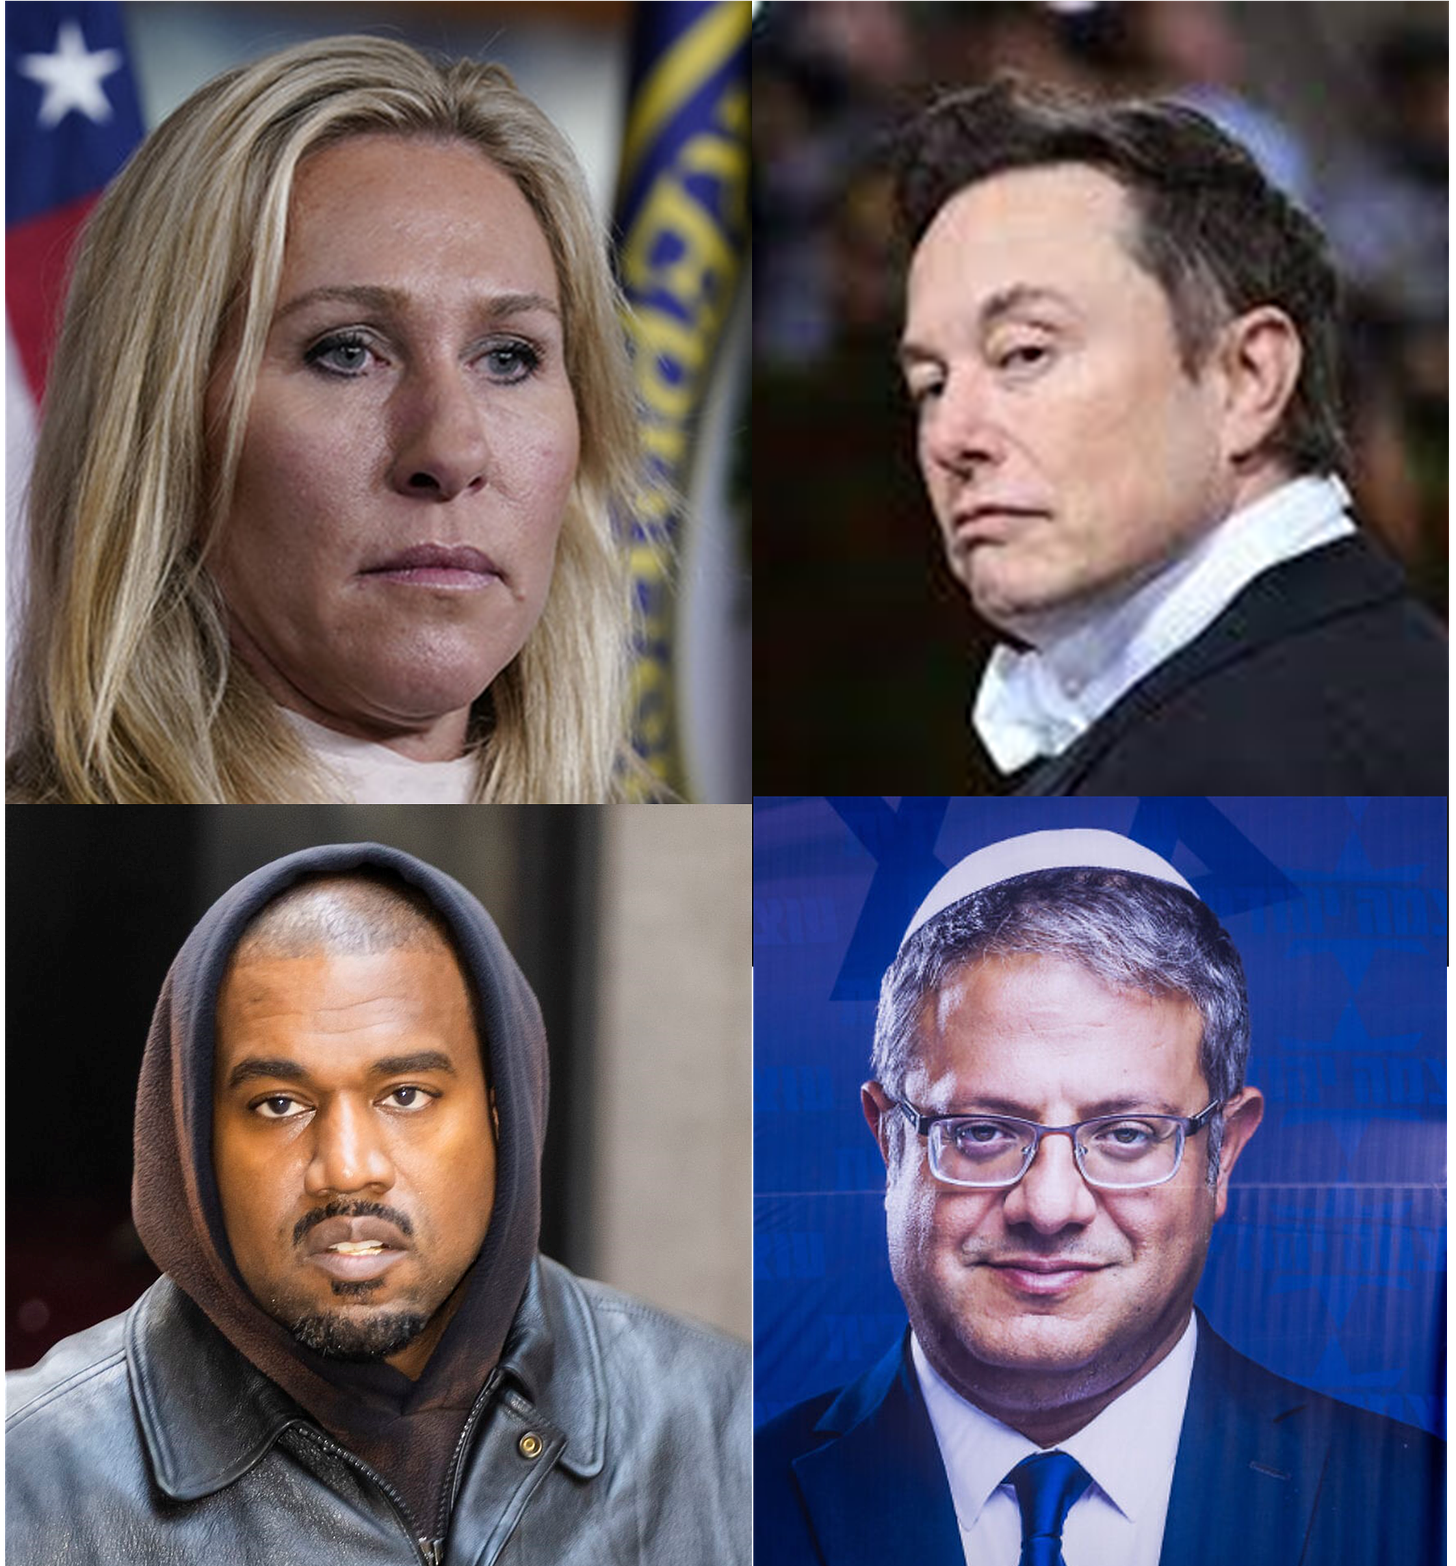 Four faces, clockwise from top left: Marjorie Taylor Green, Elon Musk, Itamar Ben Gvir, and Ye (formerly Kanye West)